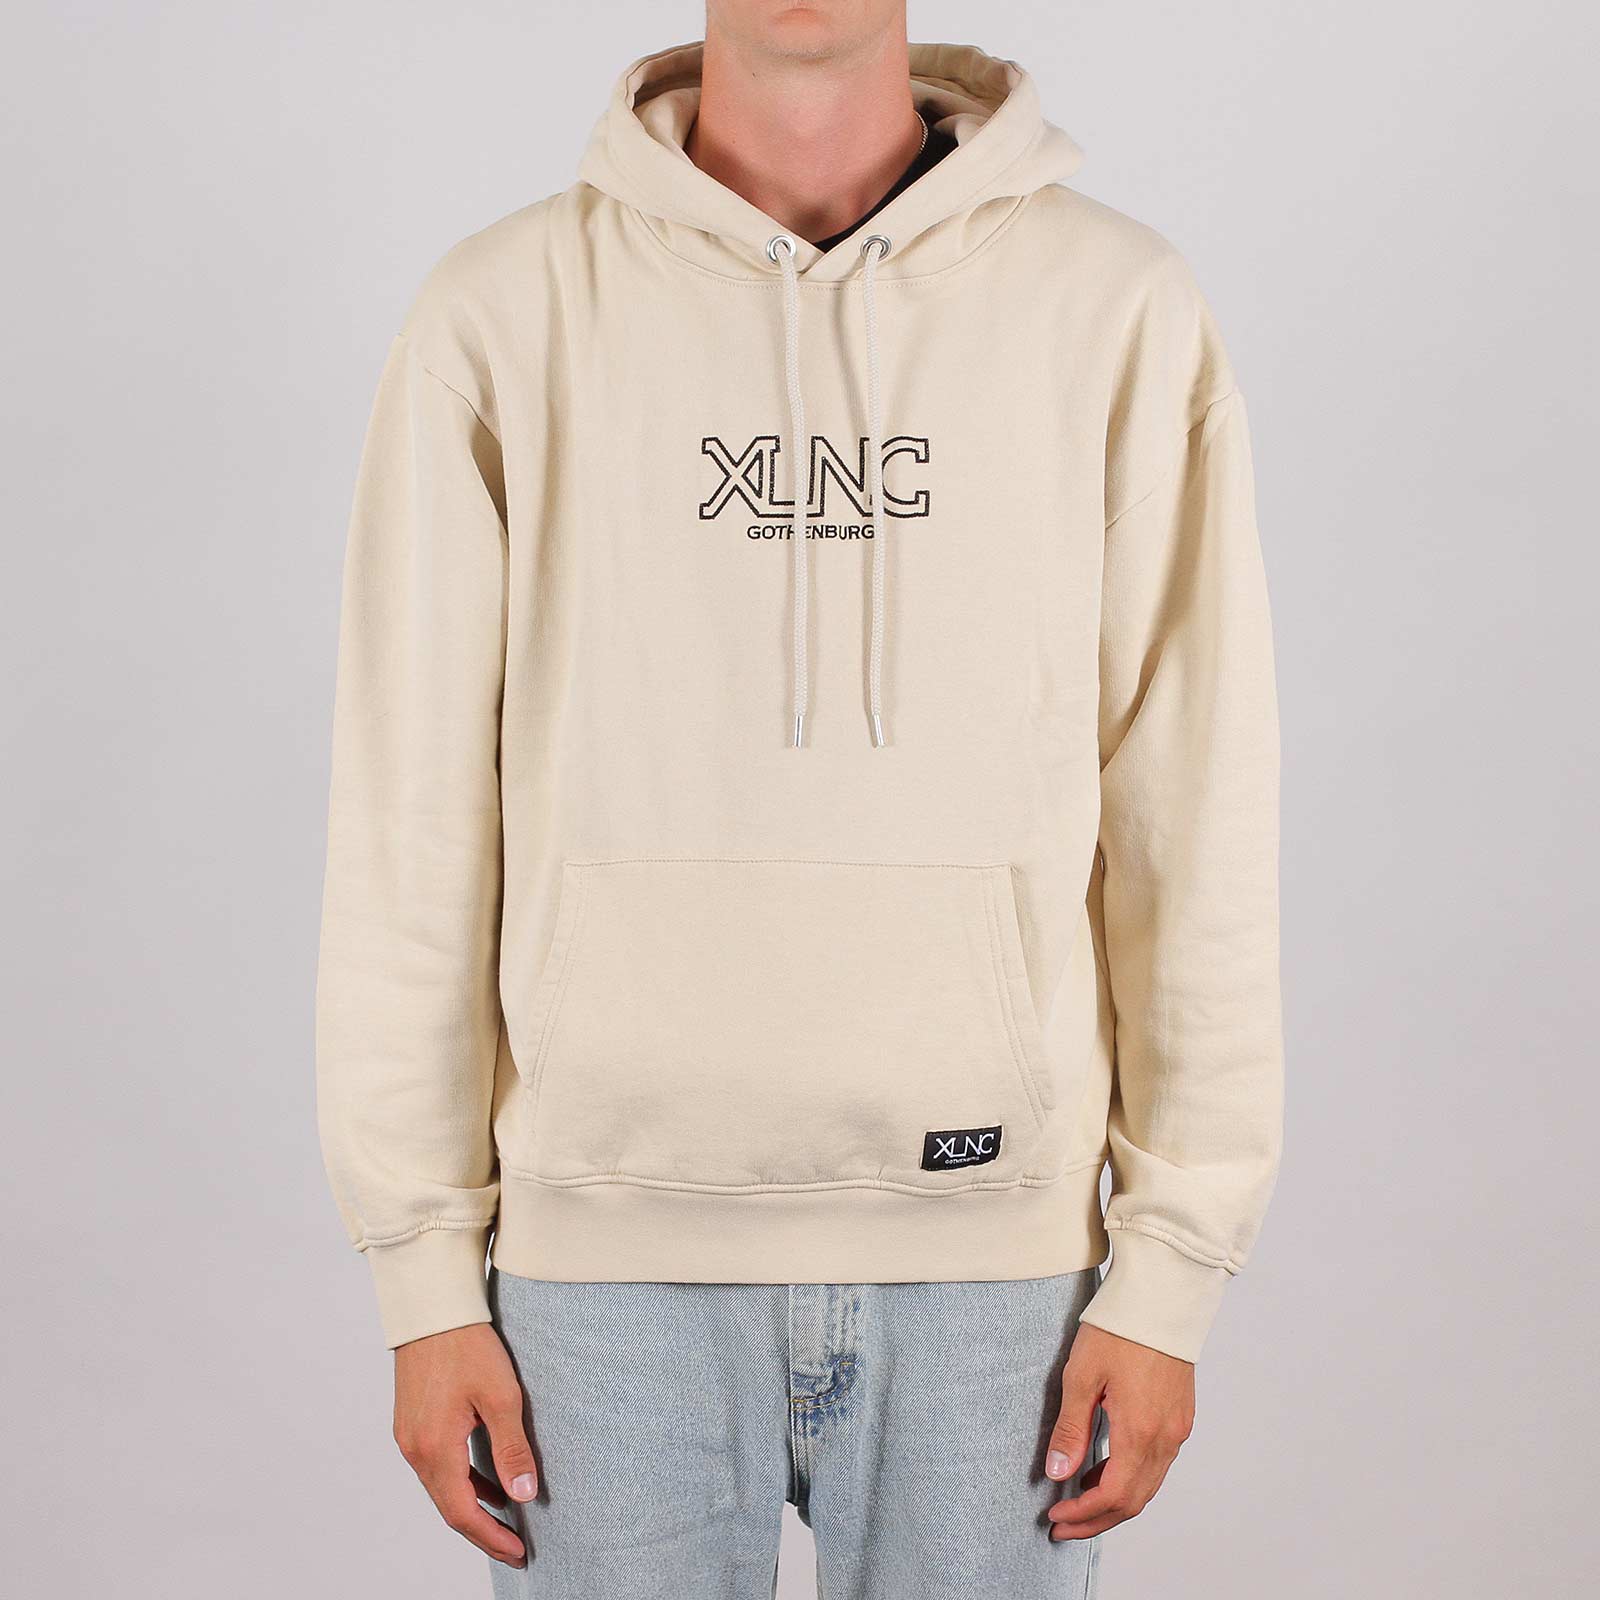 cream colored hoodie